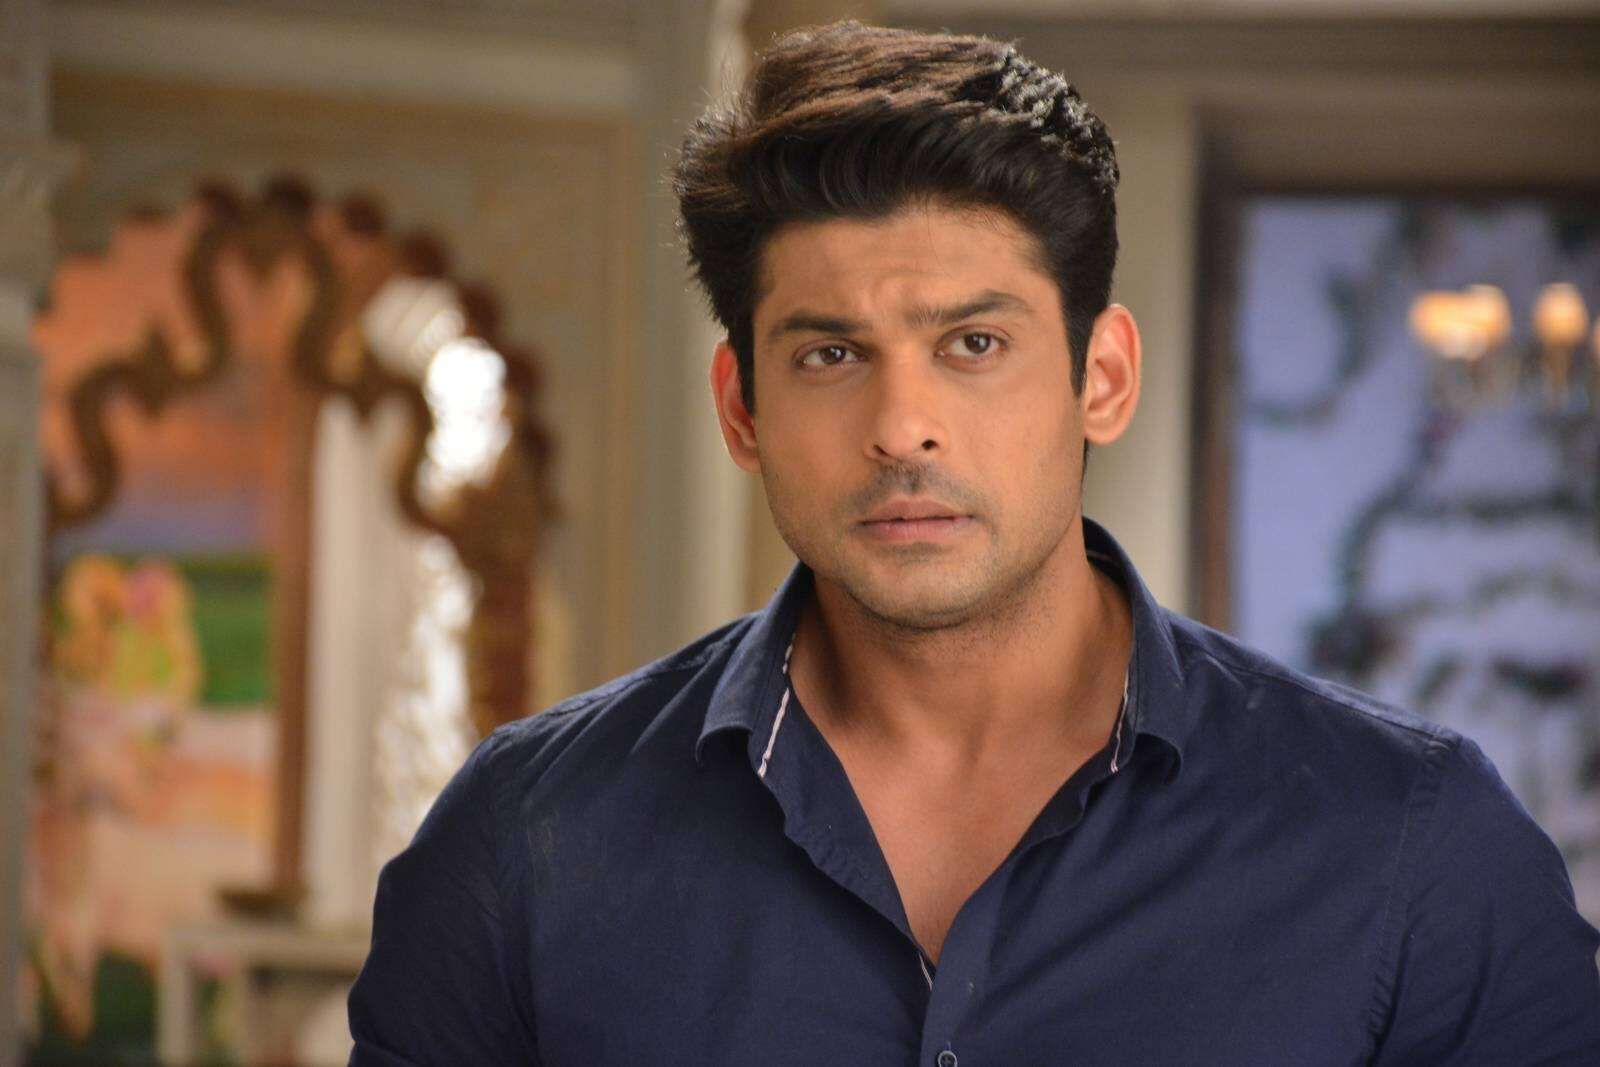 Sidharth Shukla demise: Viscera of late actor sent to lab for further examination, initial reports show no sign of unnatural death